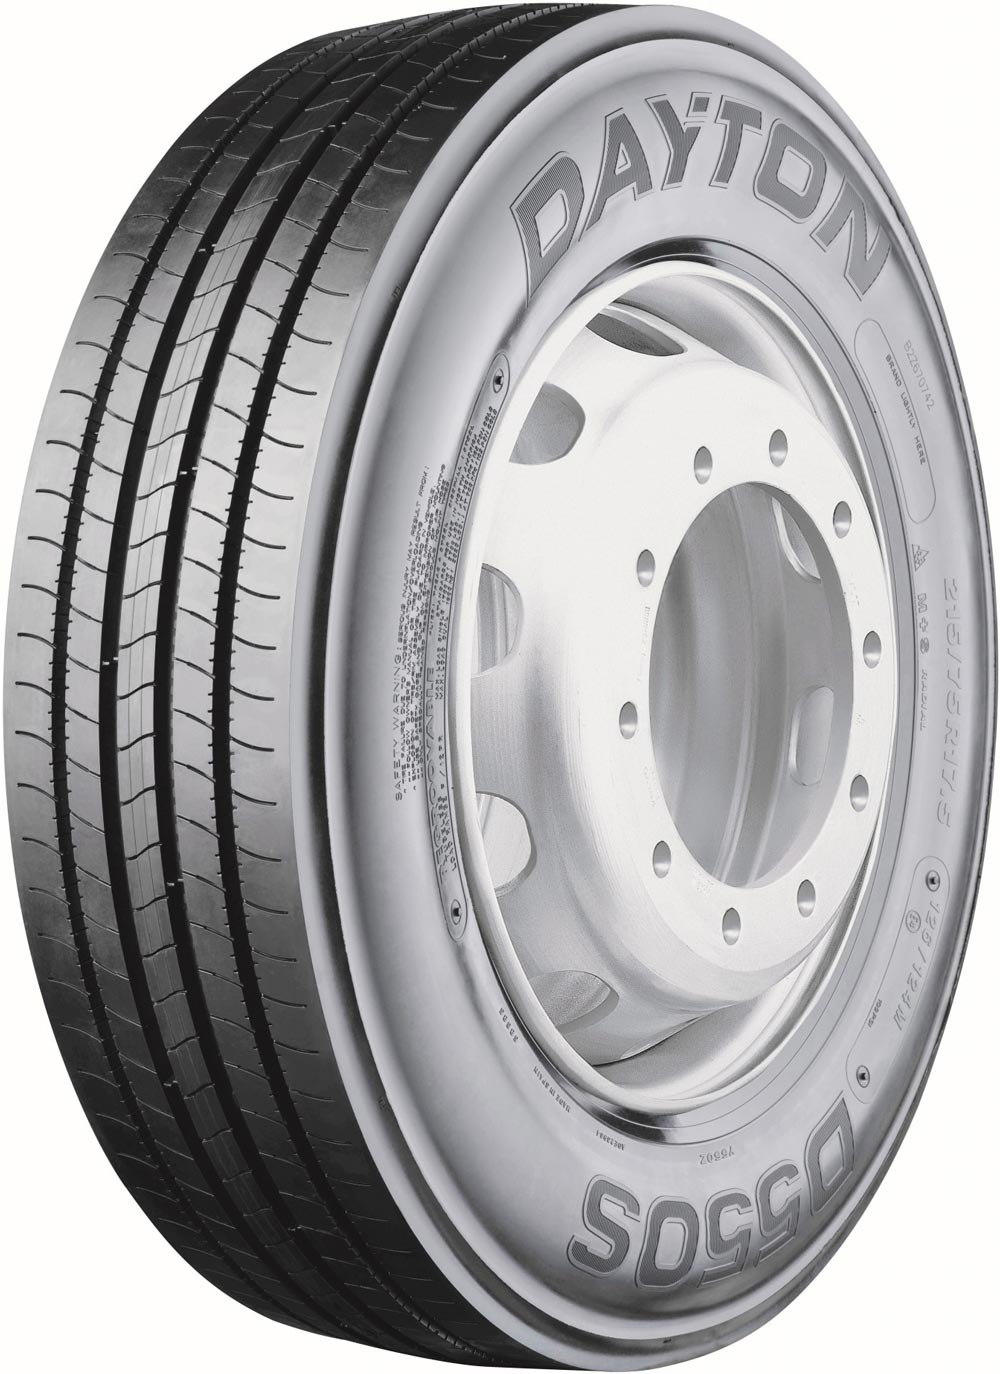 product_type-heavy_tires DAYTON D550S 215/75 R17.5 126M